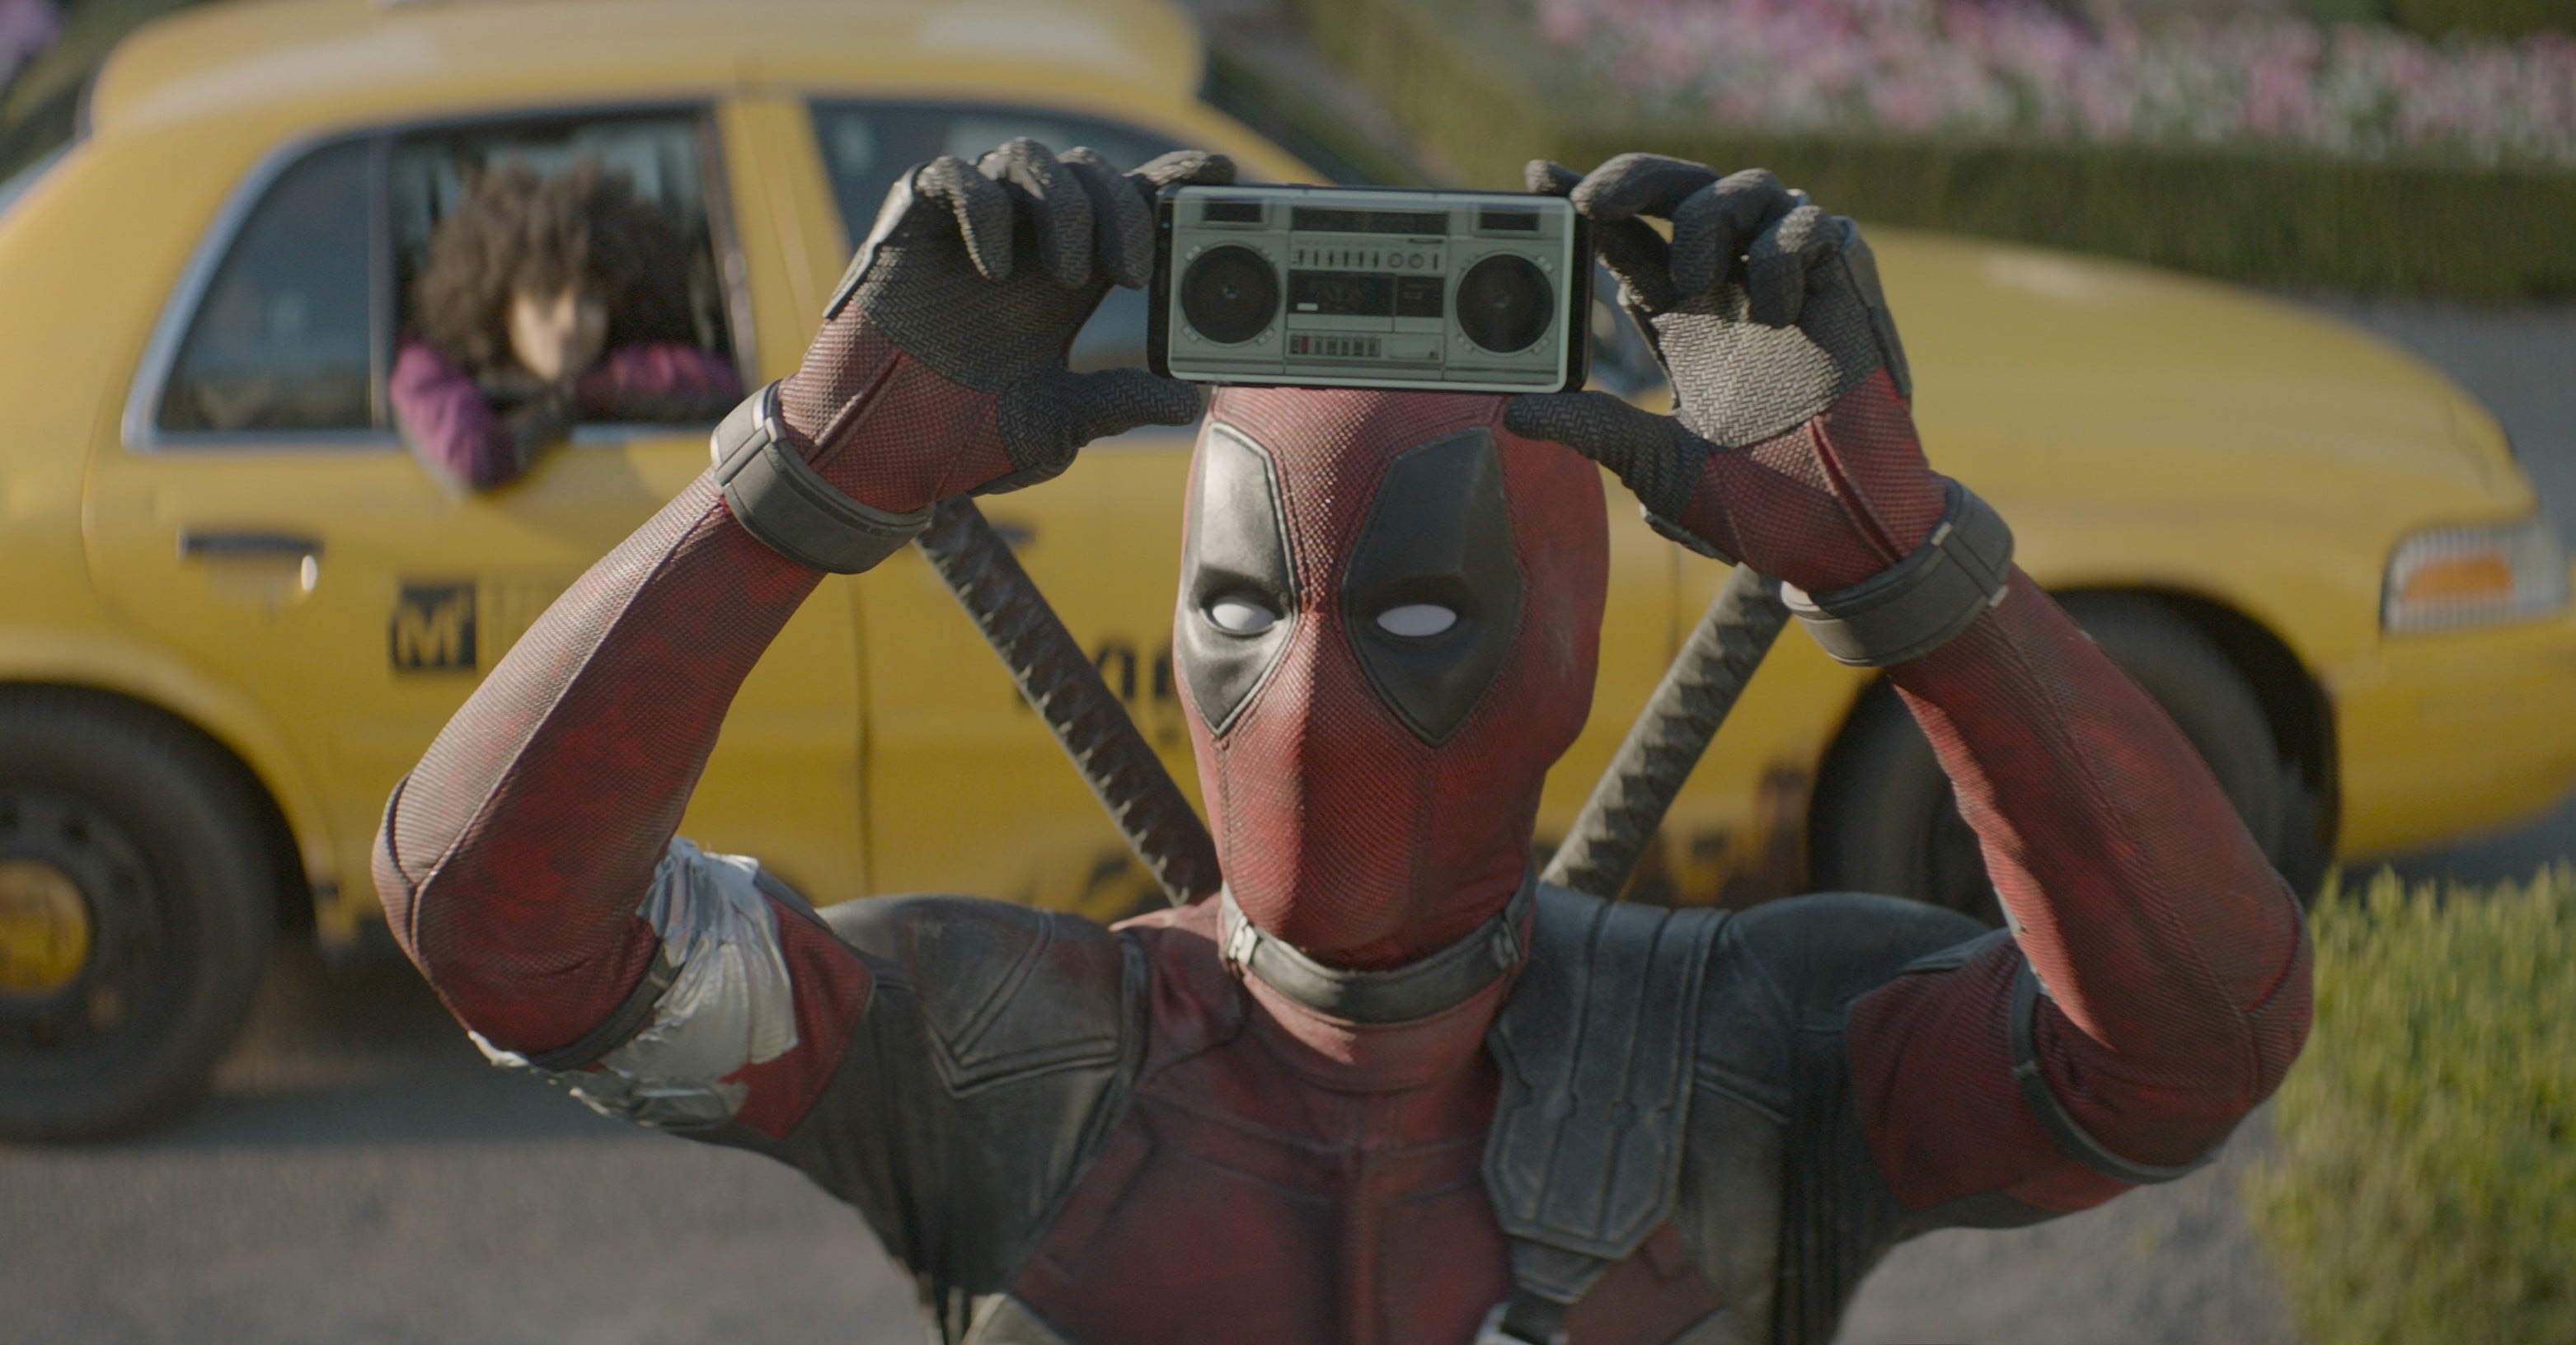 How Is Deadpool Connected to the Avengers?